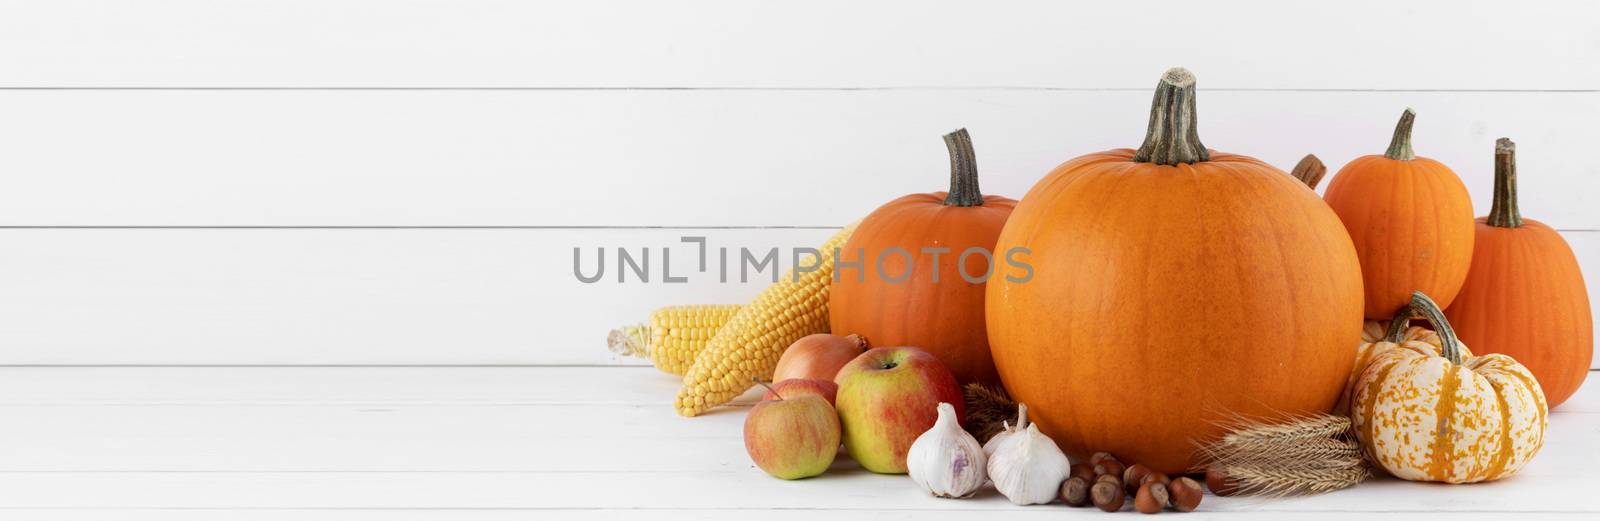 Autumn harvest still life with pumpkins, wheat ears, corn, garlic, onion and apples on wooden background